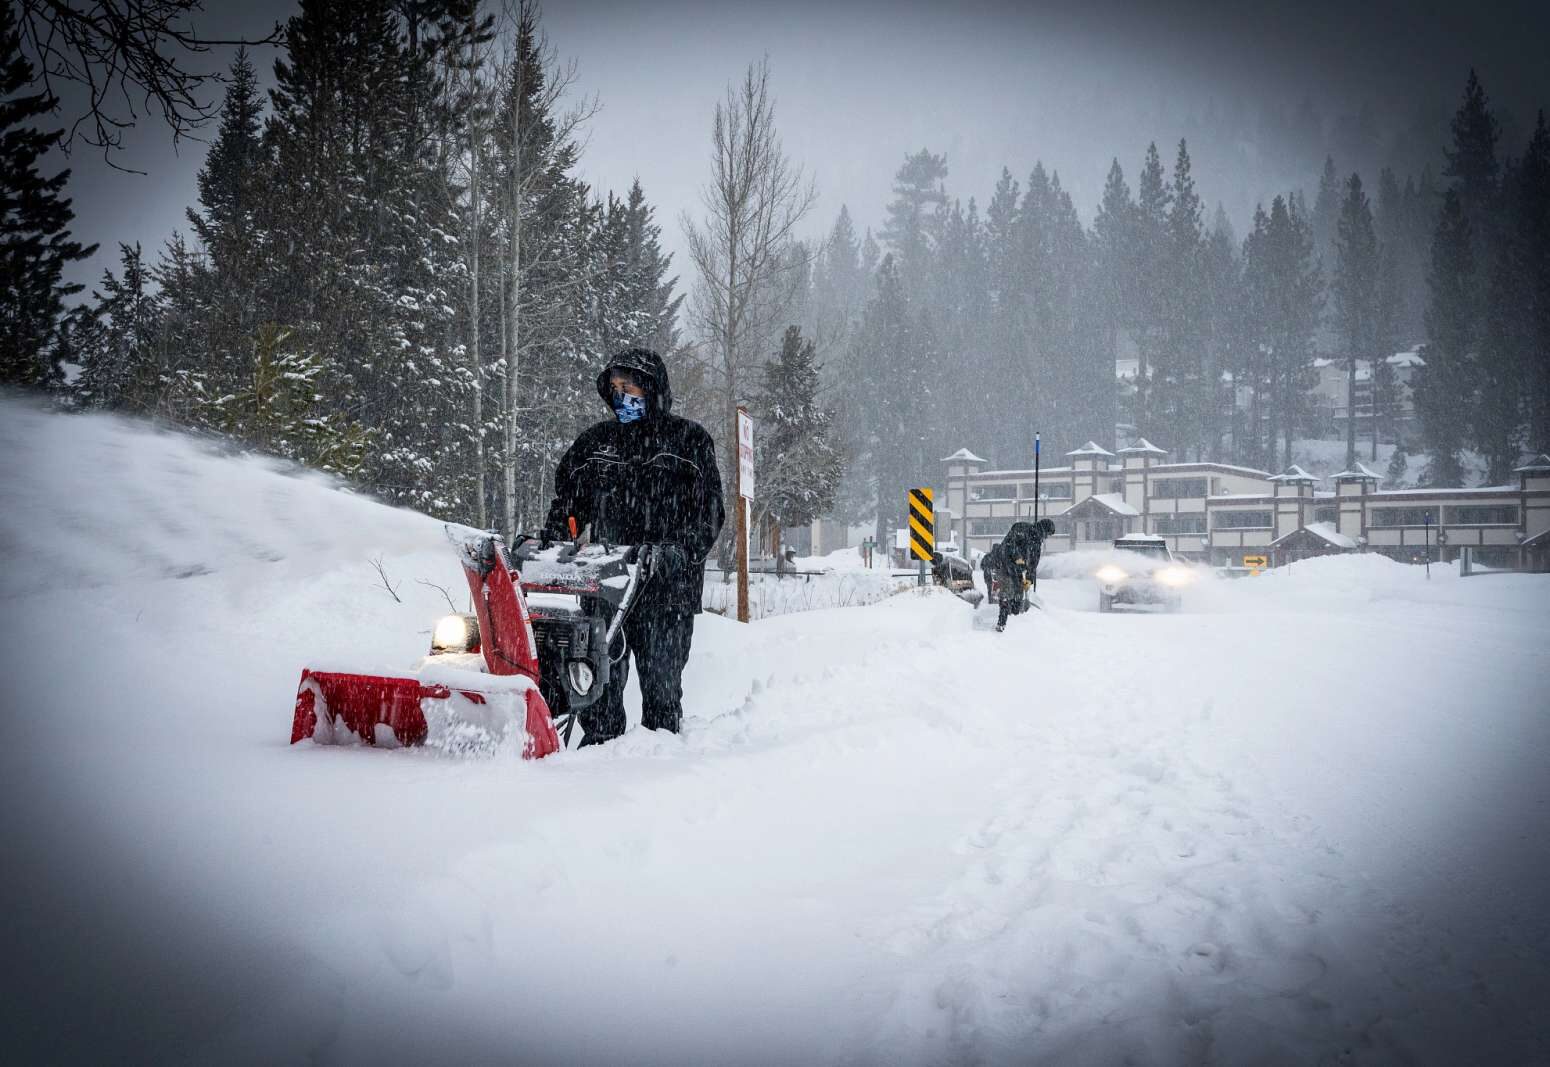 Between 8 and 14 inches fell overnight at Squaw Valley and Alpine Meadows ski resorts.